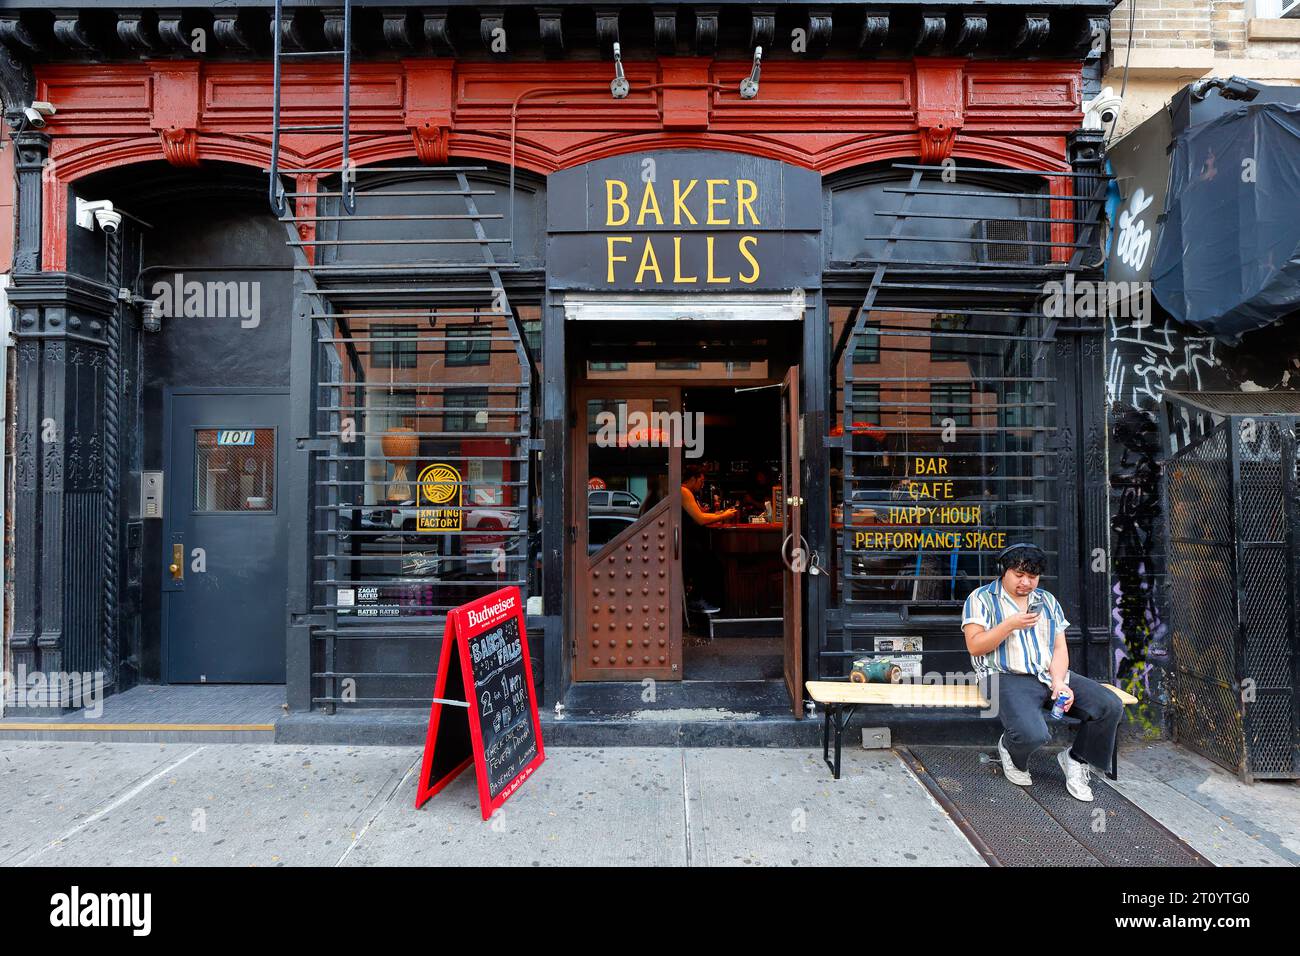 Knitting Factory at Baker Falls, 101 Avenue A, New York, NYC storefront of a live music venue in Manhattan's East Village neighborhood. Stock Photo